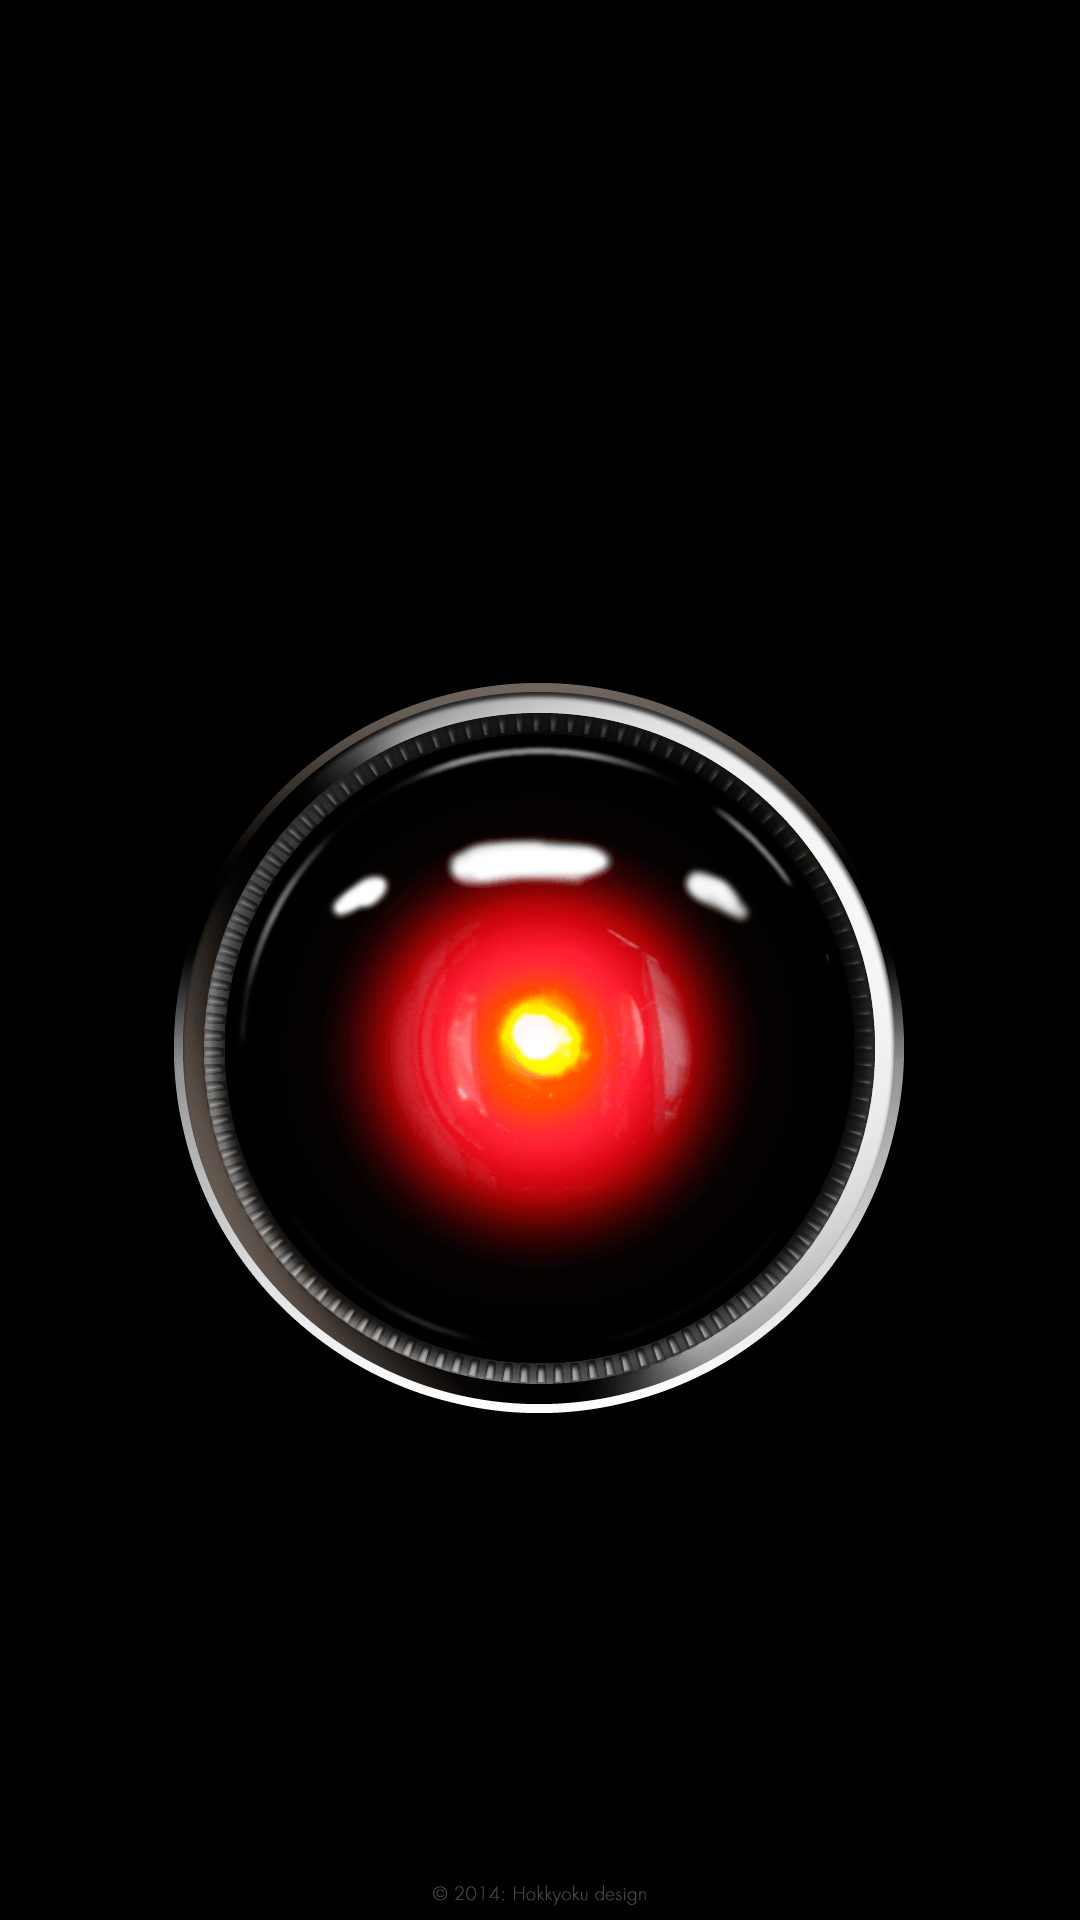 Free download Hal 9000 Wallpaper Android wwwgalleryhipcom The ...